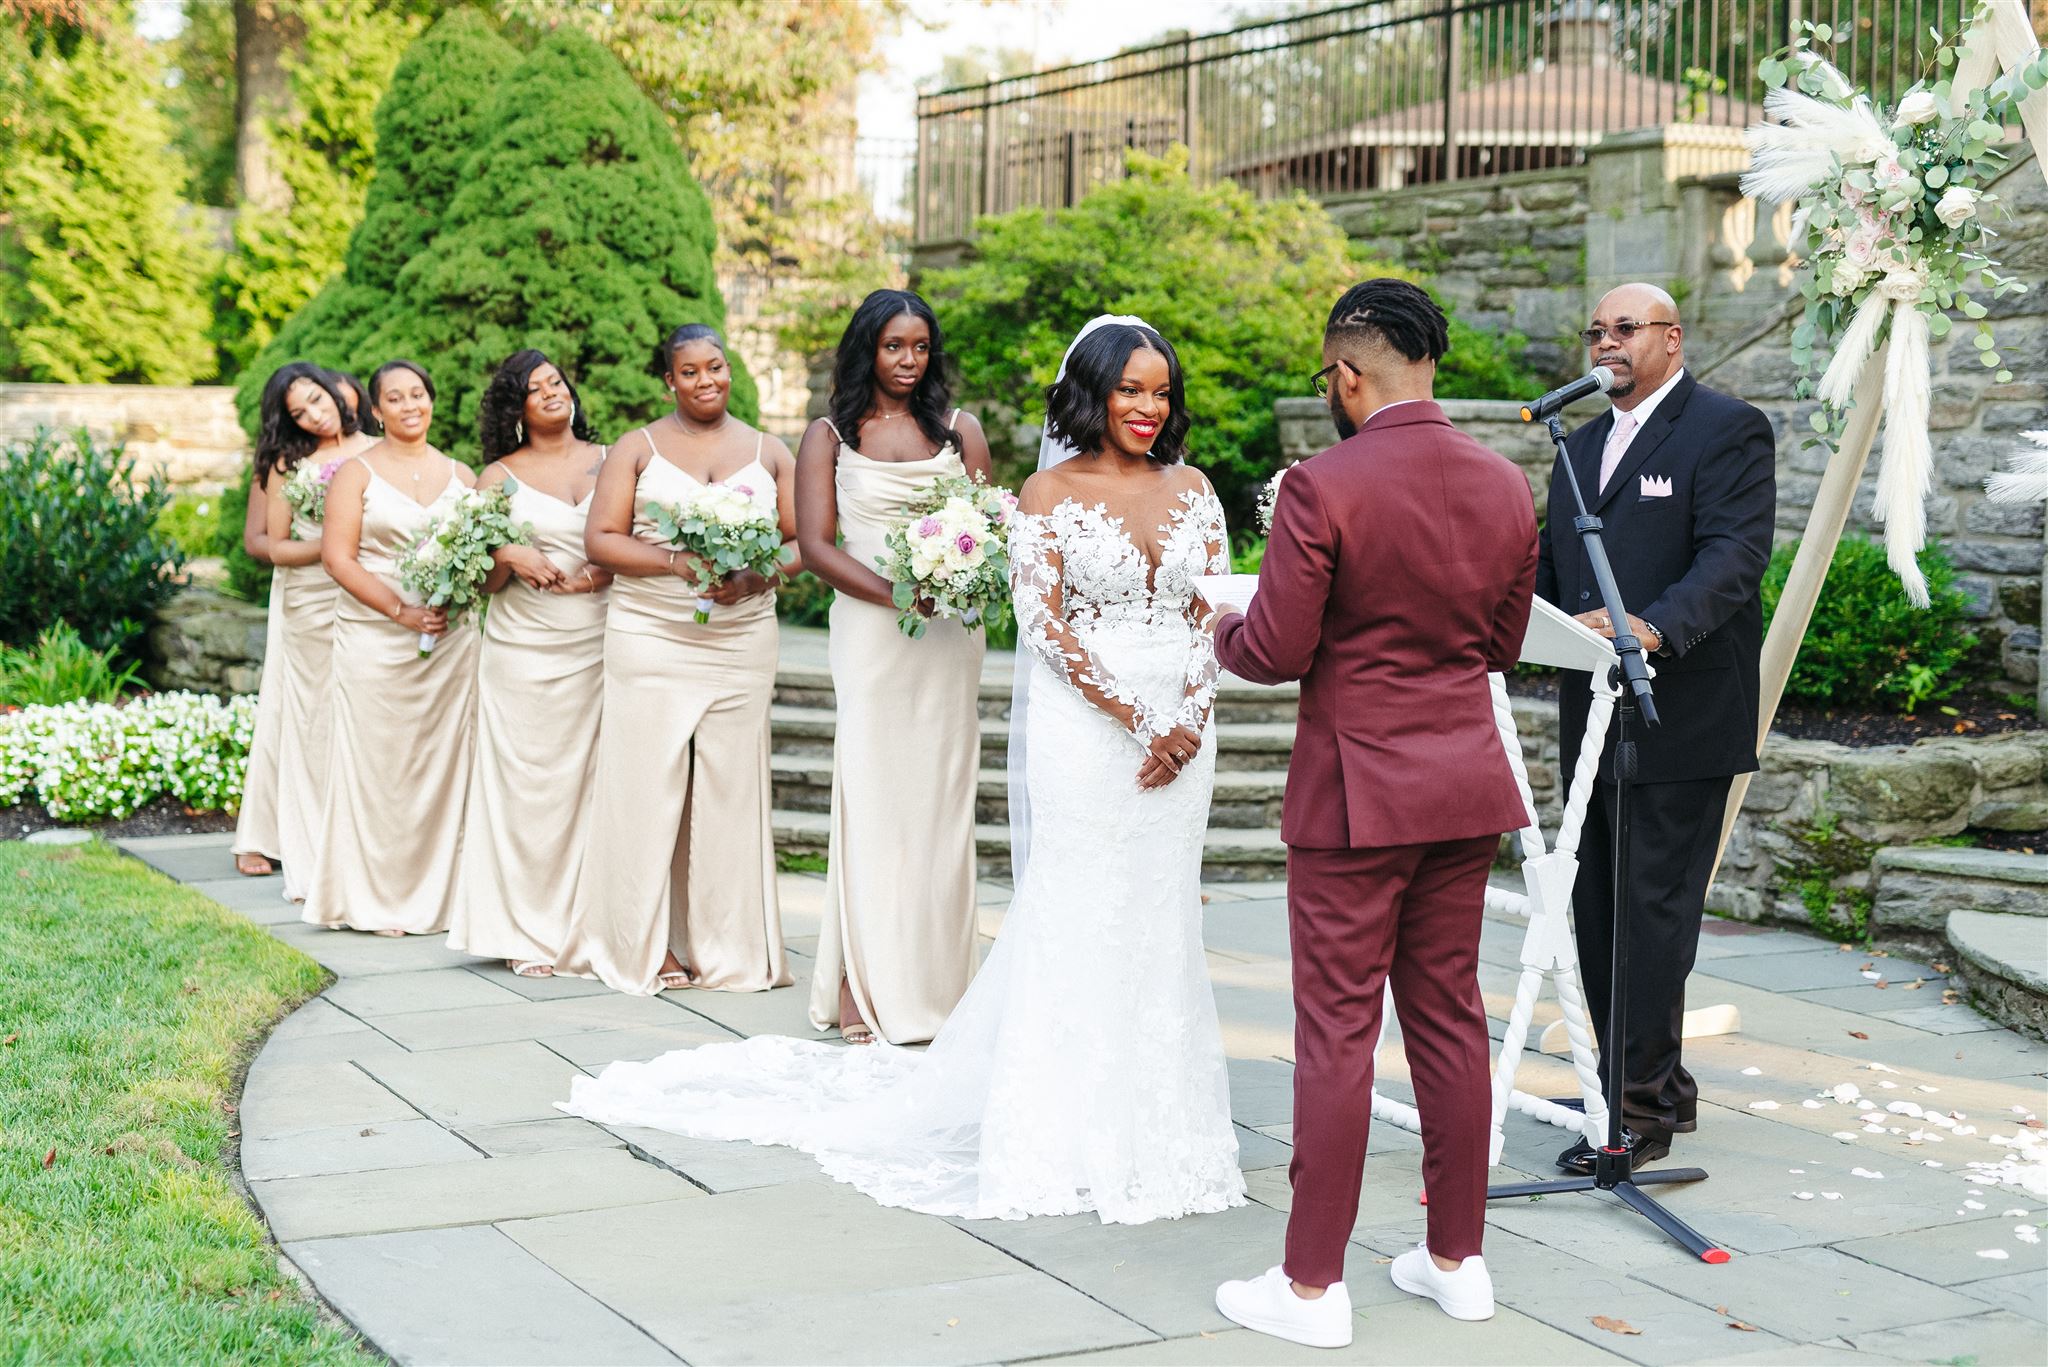 Groom reading his vows during the garden wedding ceremony with bride, officiant and bridesmaids in front of them, taken by Jason Moody Photography